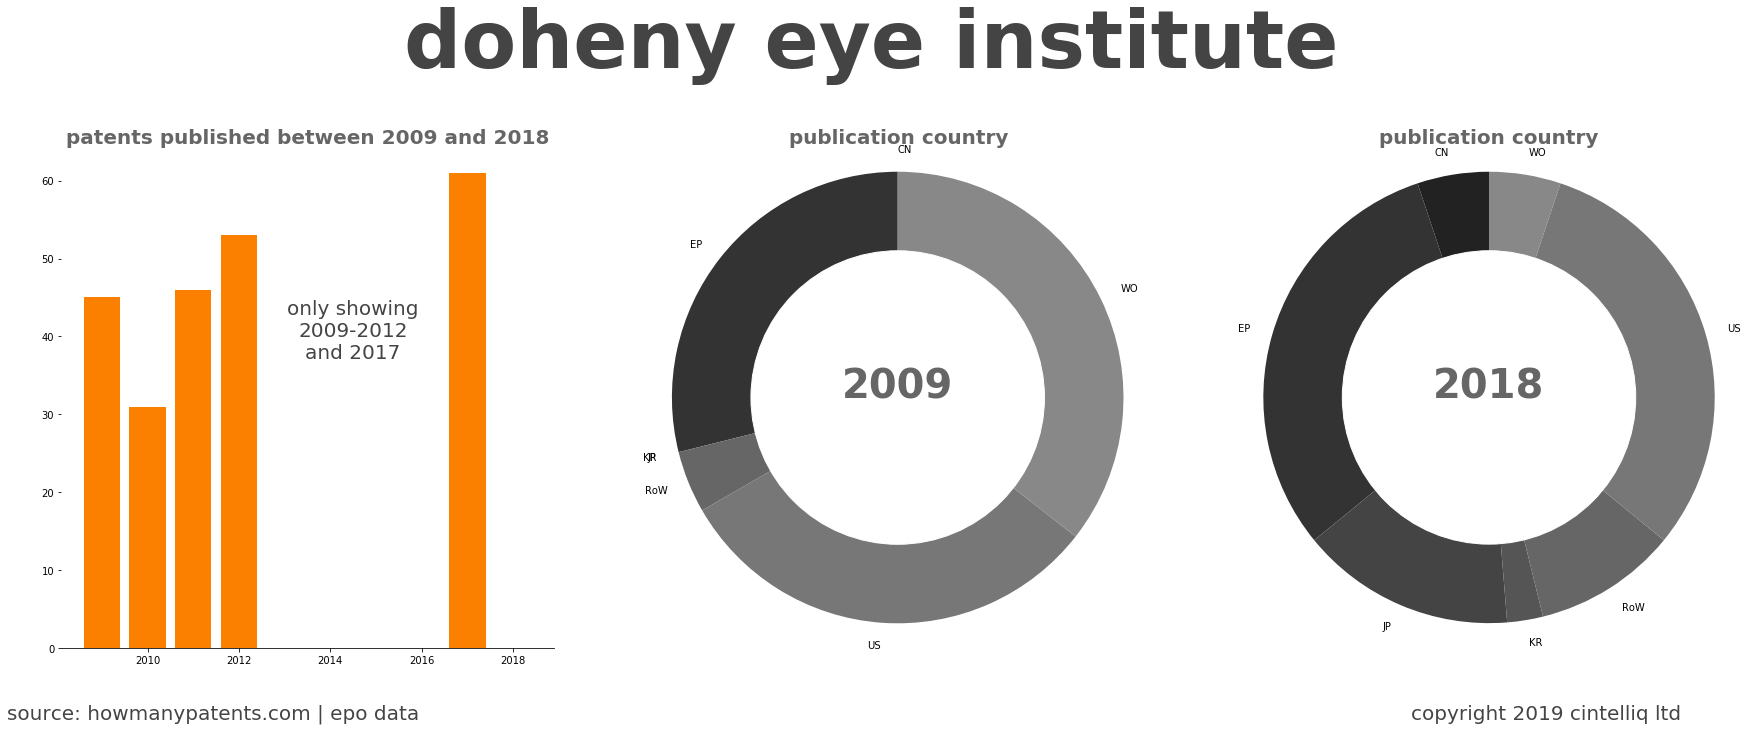 summary of patents for Doheny Eye Institute